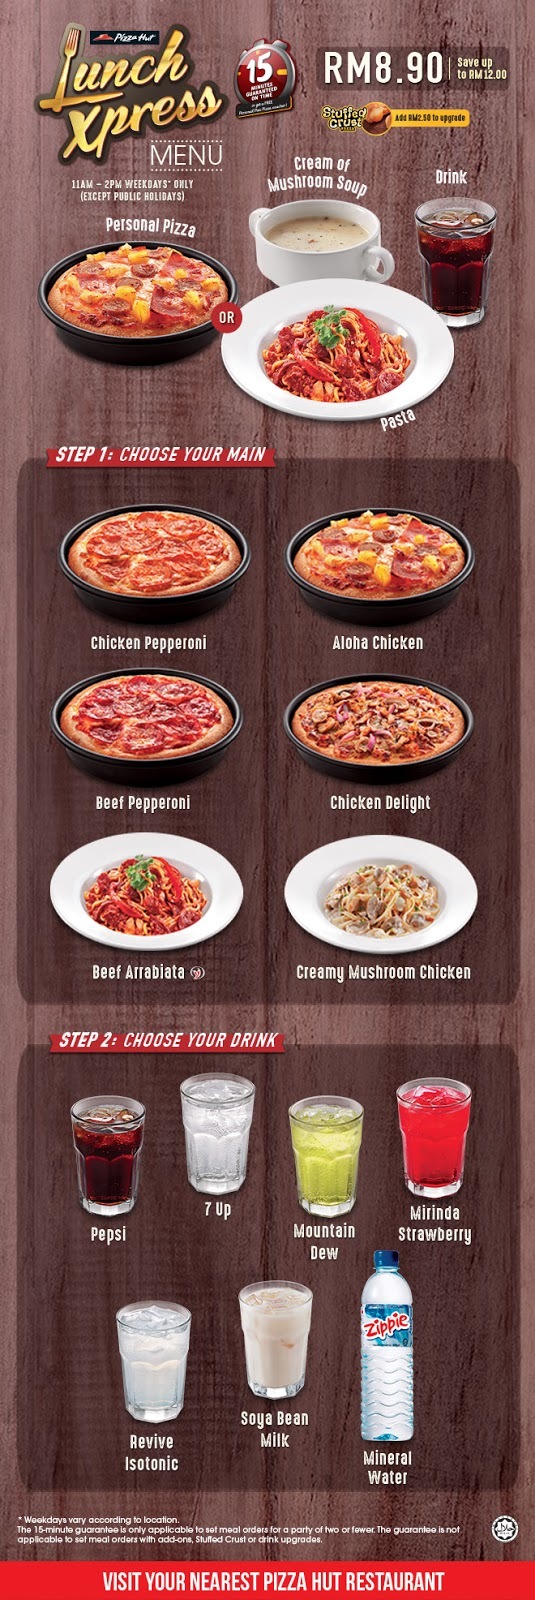 Pizza Hut Lunch Xpress Discount Offer Promo Weekdays